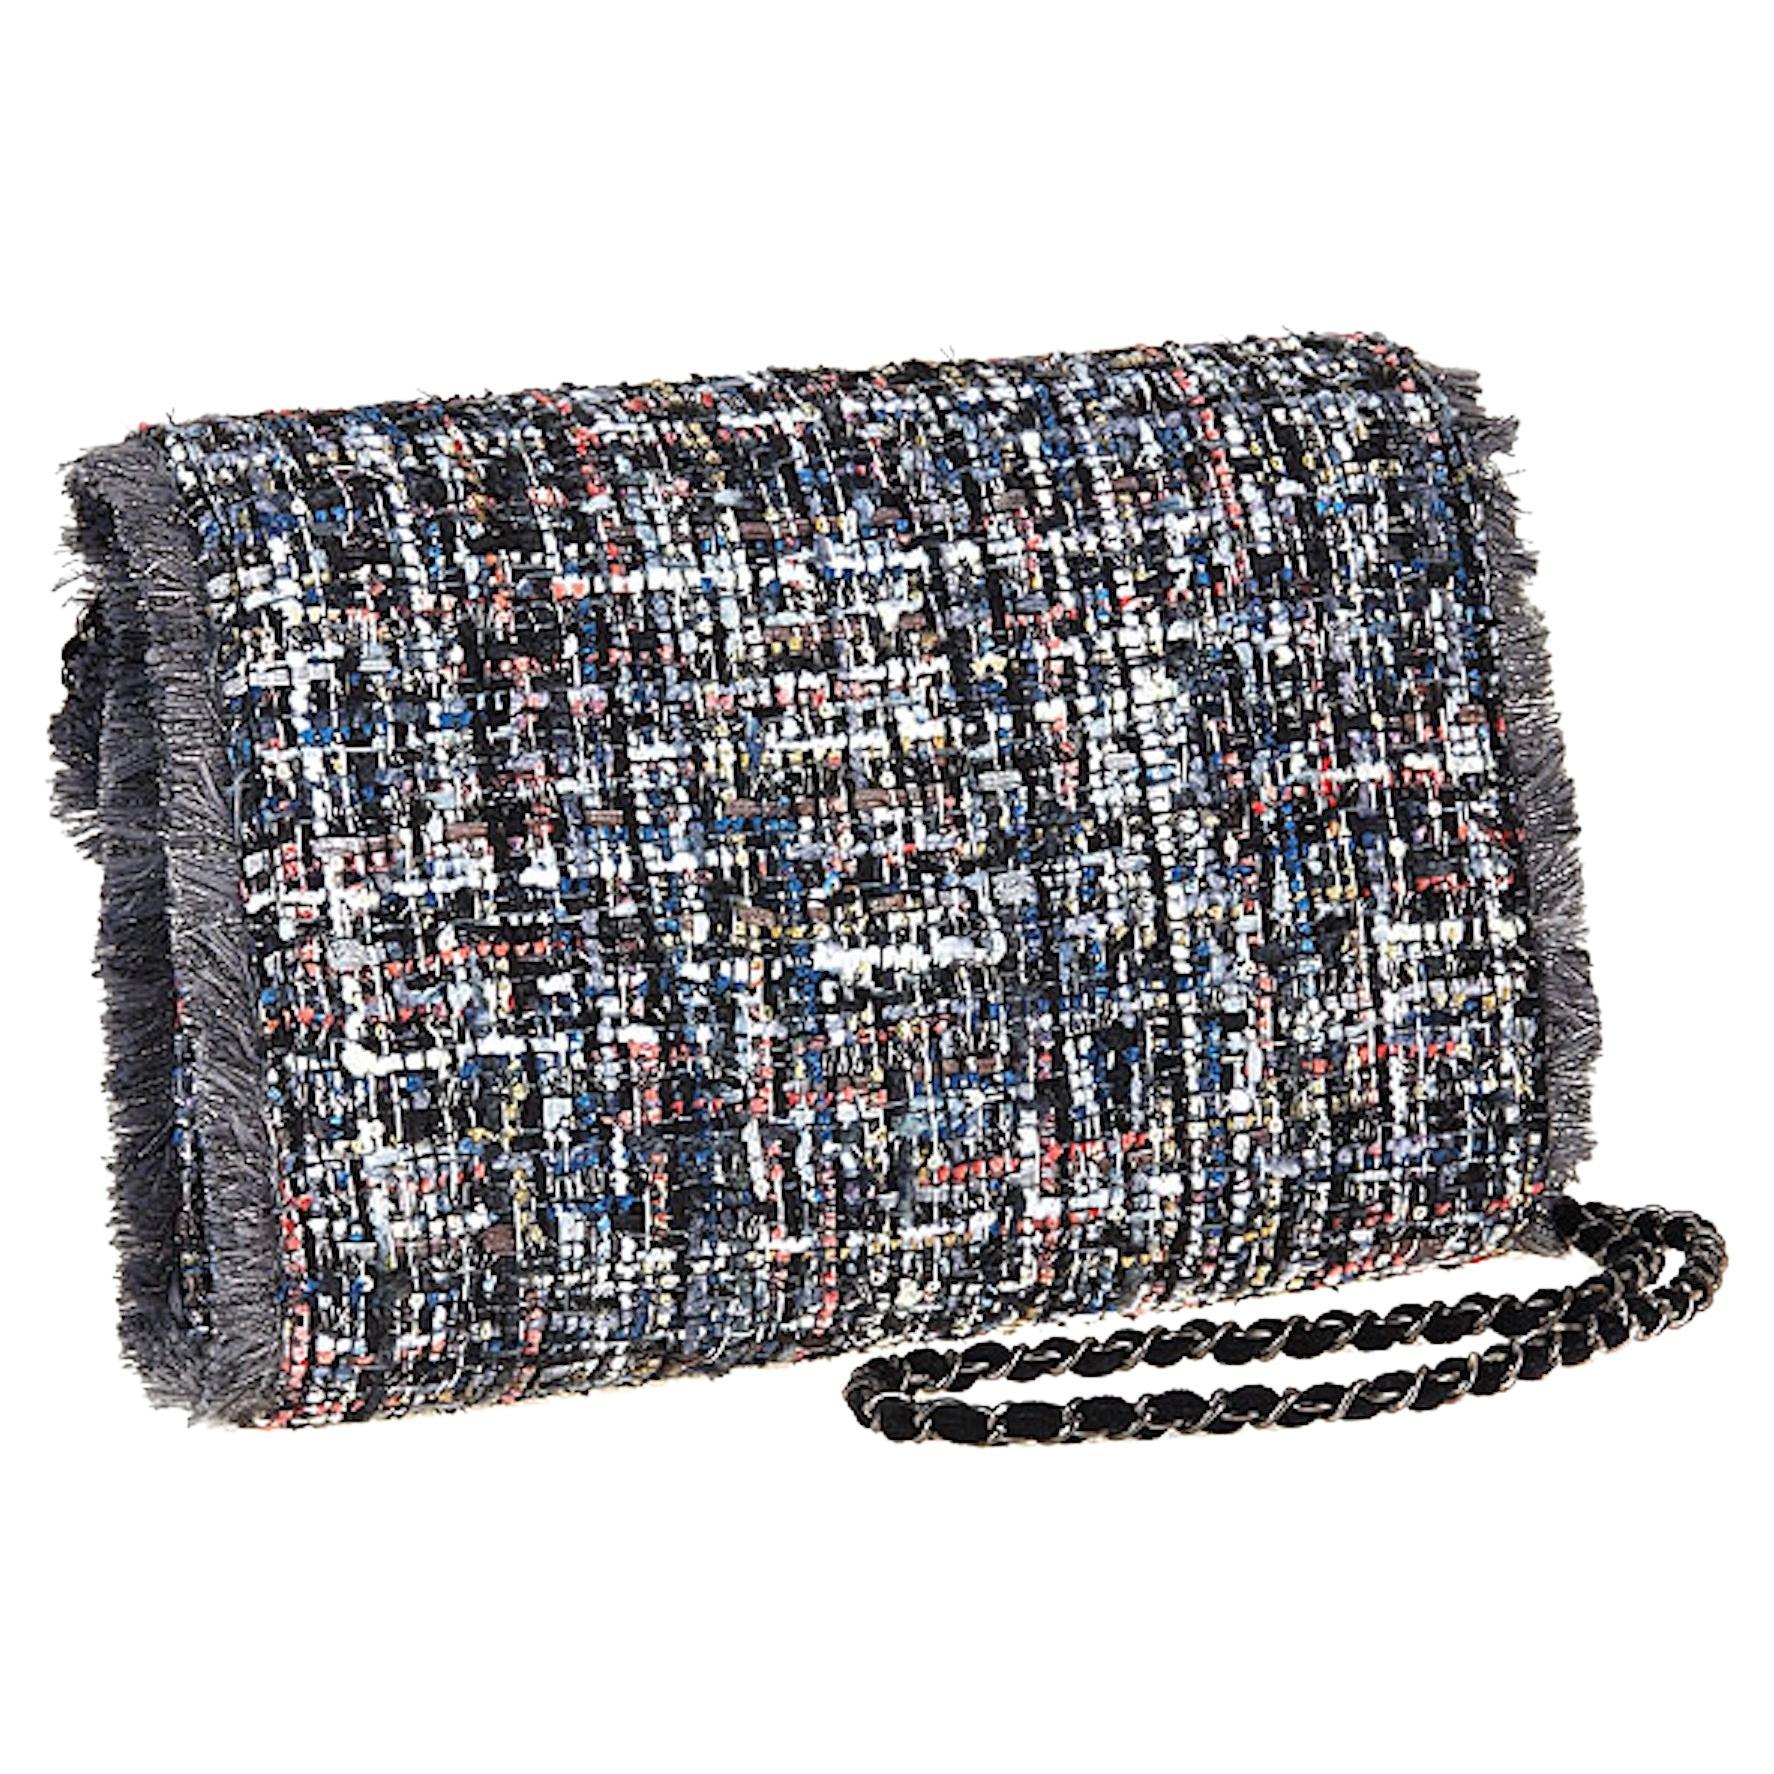 The Brielle is a classic flap bag with a plush felt woven through the chain for a softer and more elegant look.
DESCRIPTION
Fold-over flap with turn-lock closure
Tweed w/fringed edges
Non-removable woven velvet chain crossbody strap
Zippered